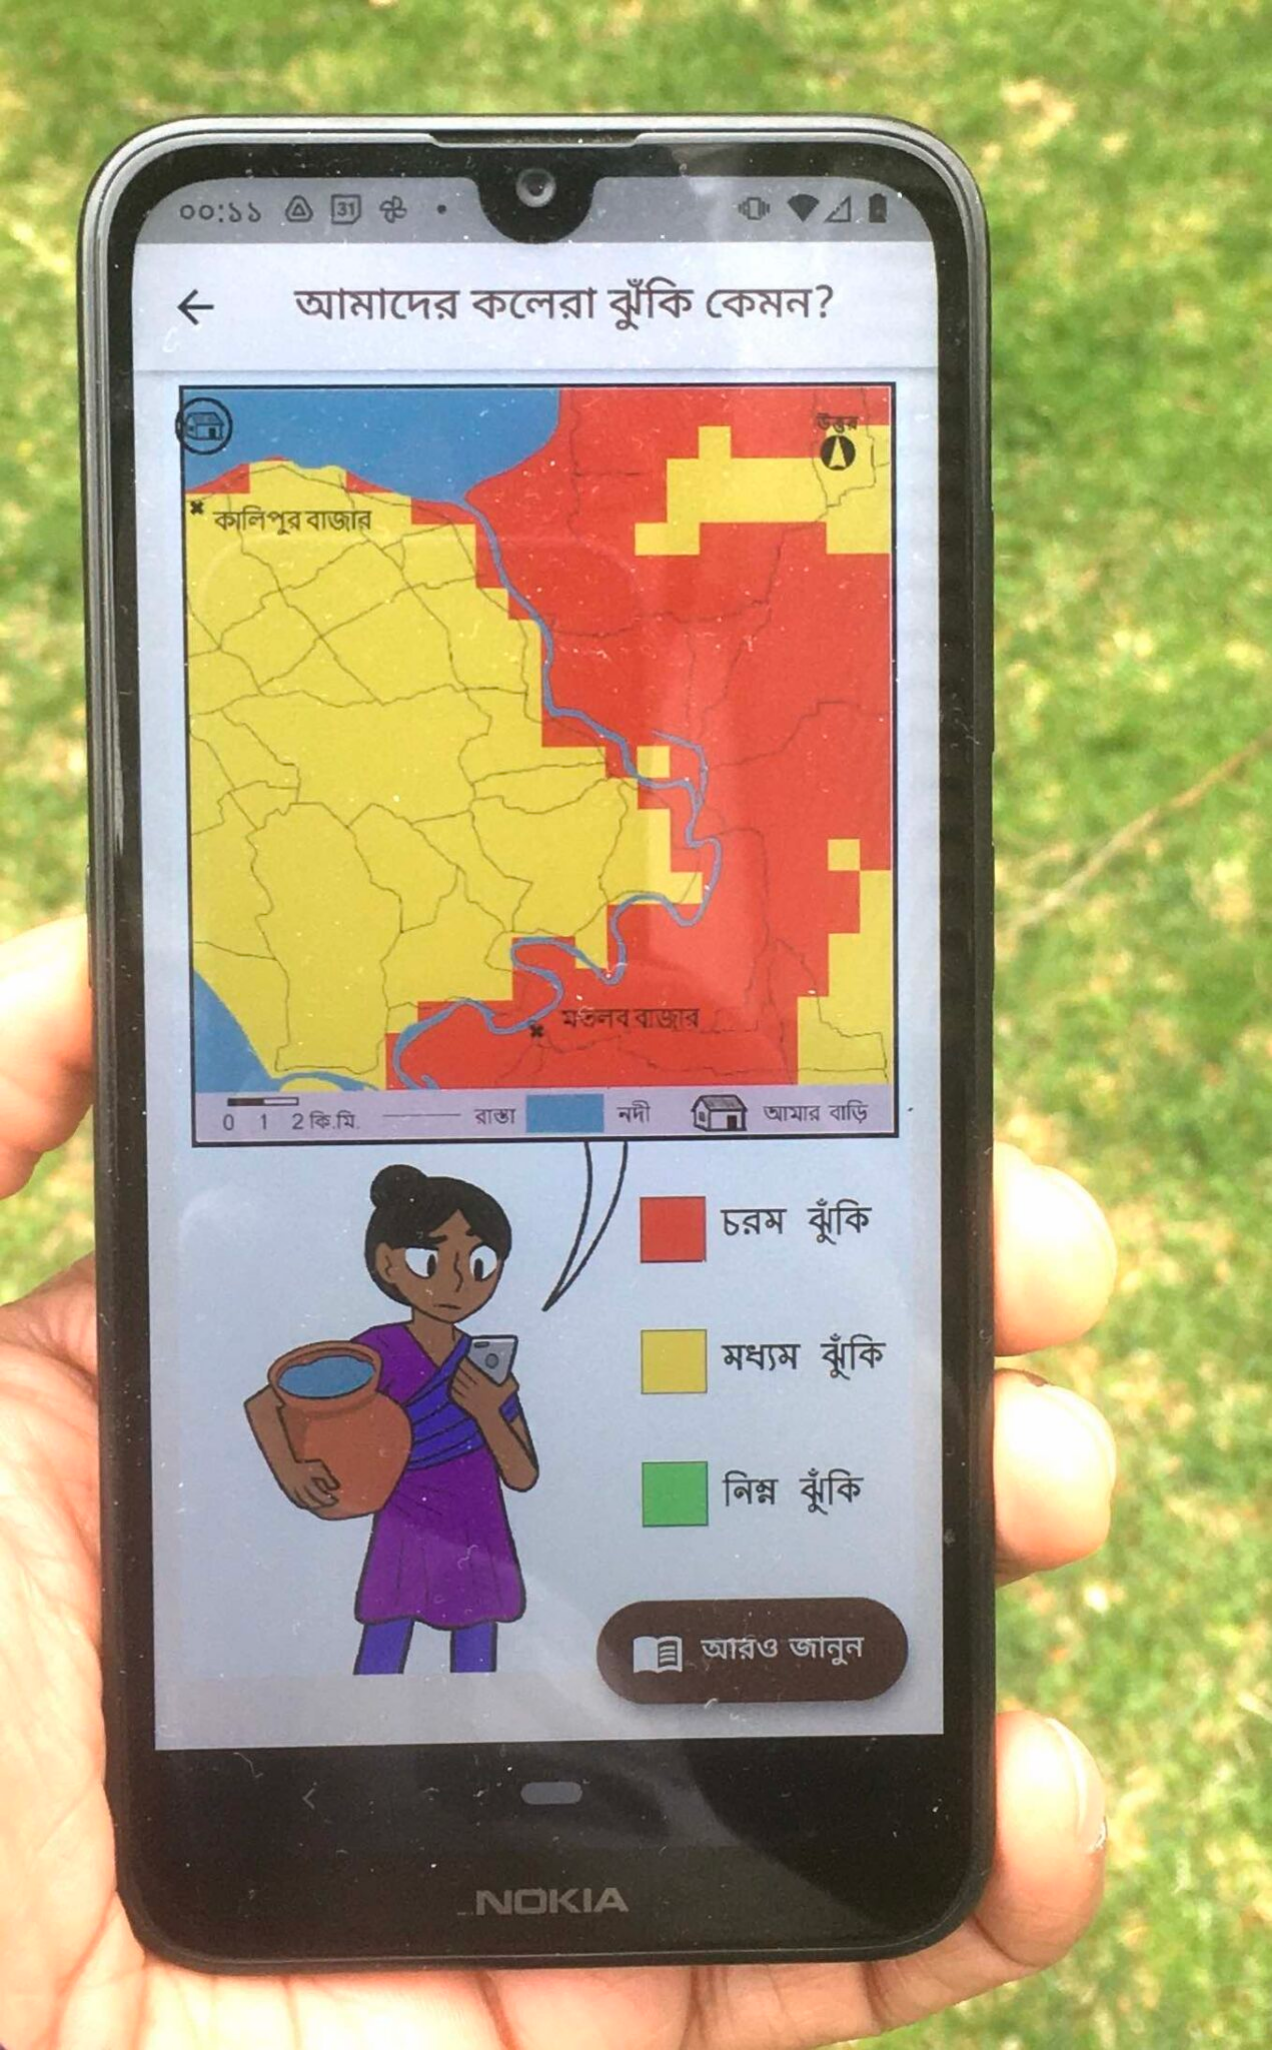 Cholera Map- From satellite to smartphone, app warns public of unsafe water